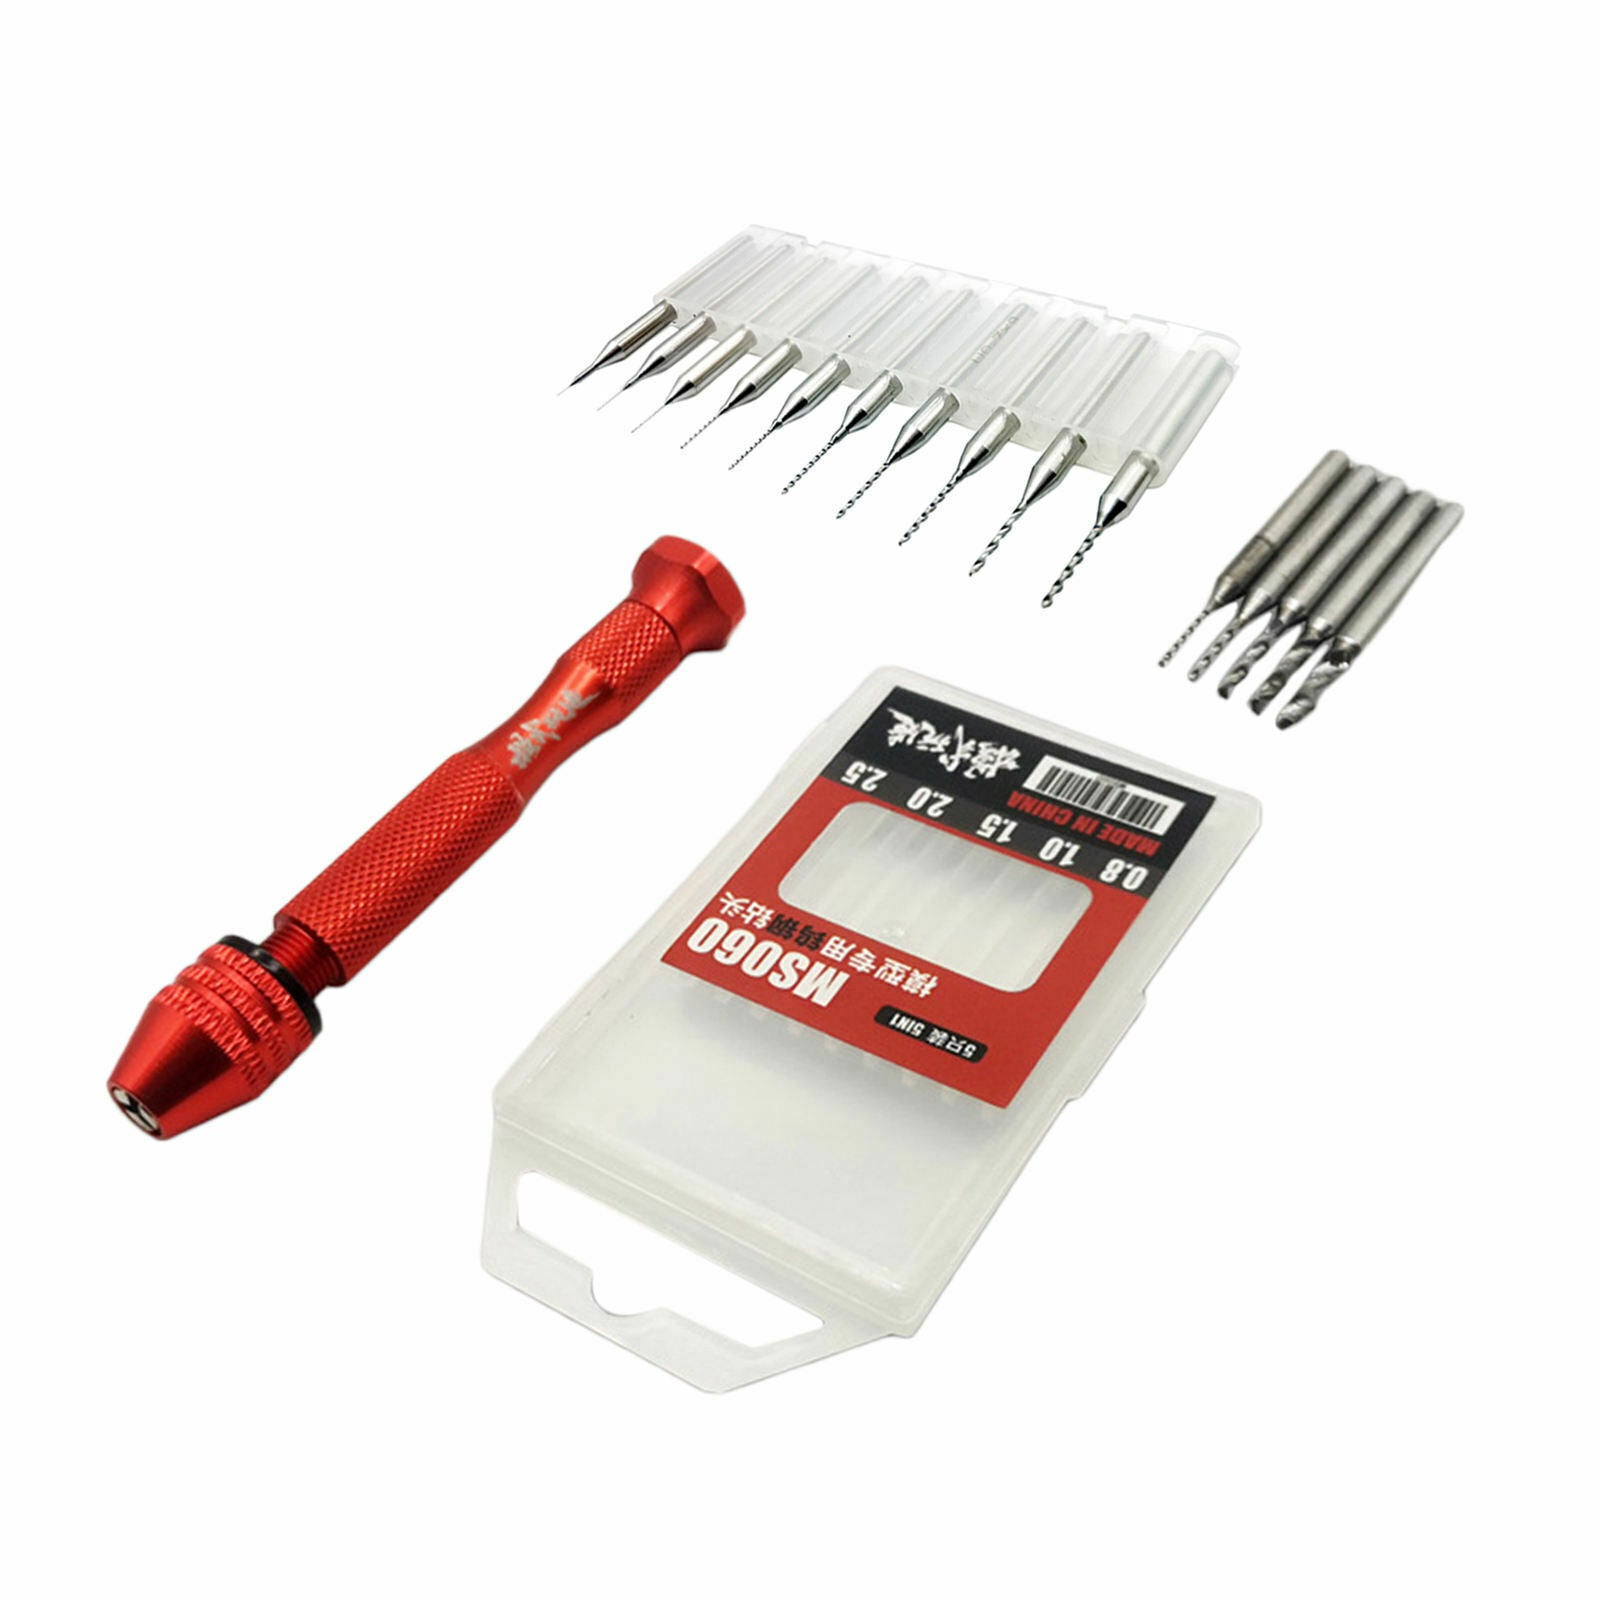 Precision Hand Drill Set Twist for Gundam Hobby Tool Carving Manual Work